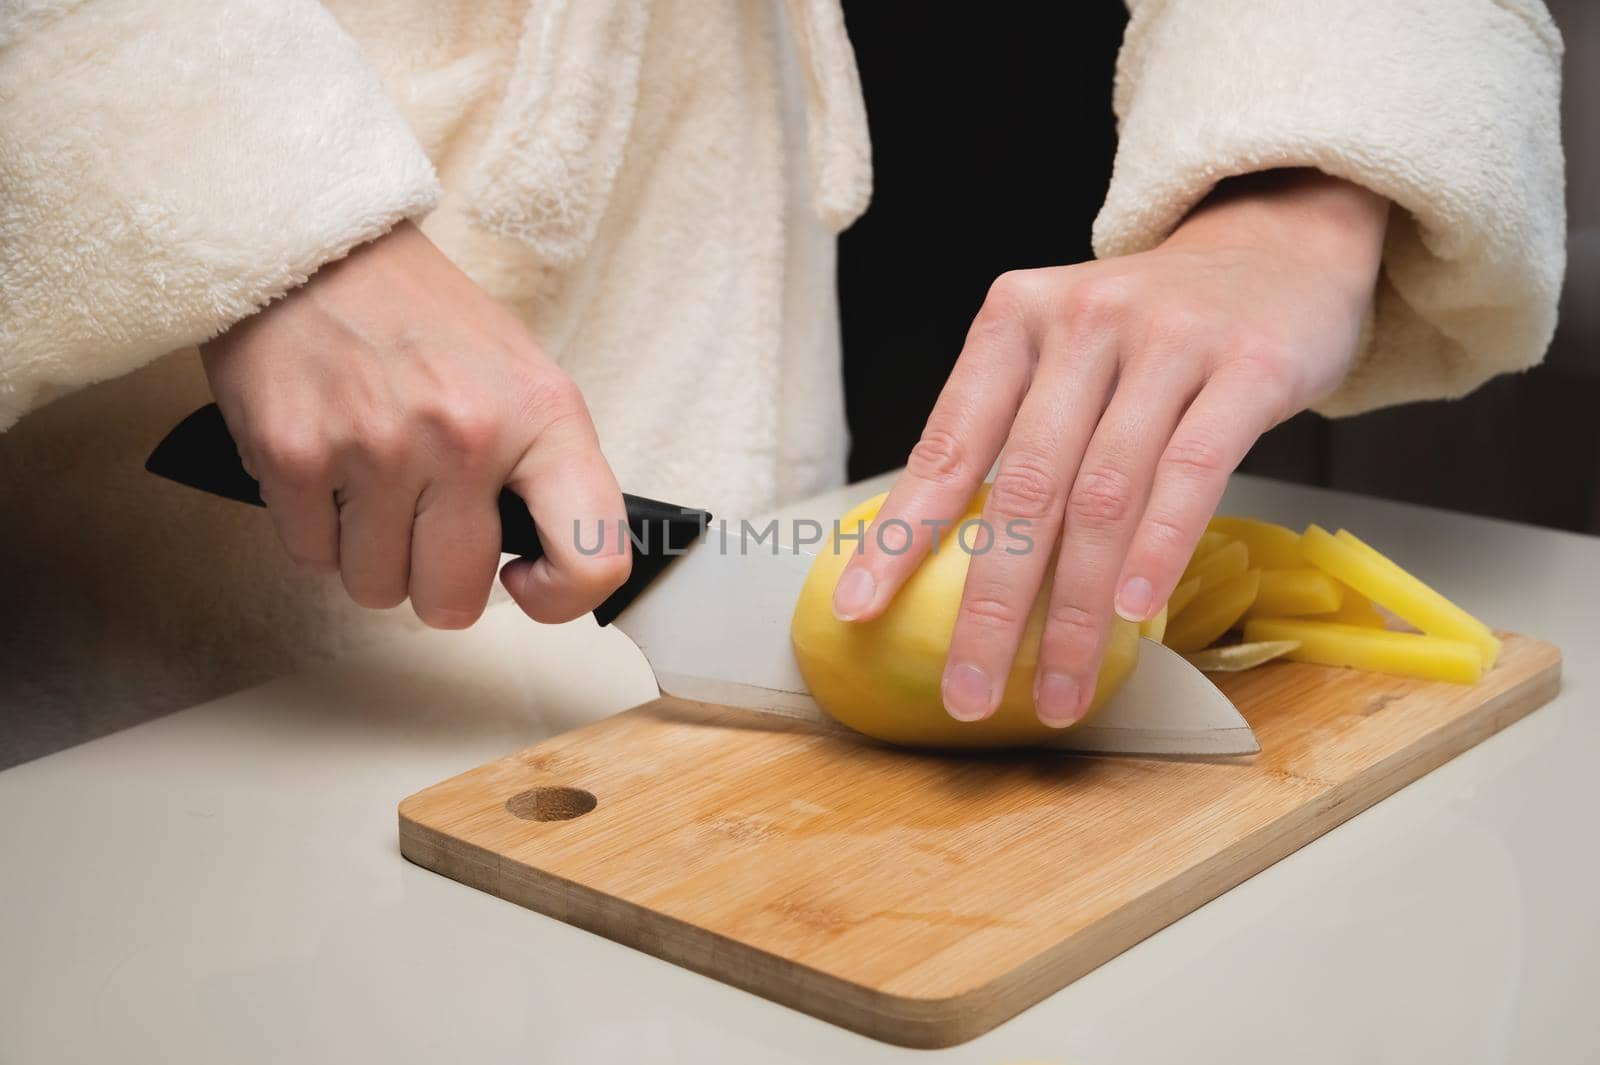 Close-up of female hands cutting peeled potatoes on a wooden cutting board. Home cooking potatoes.